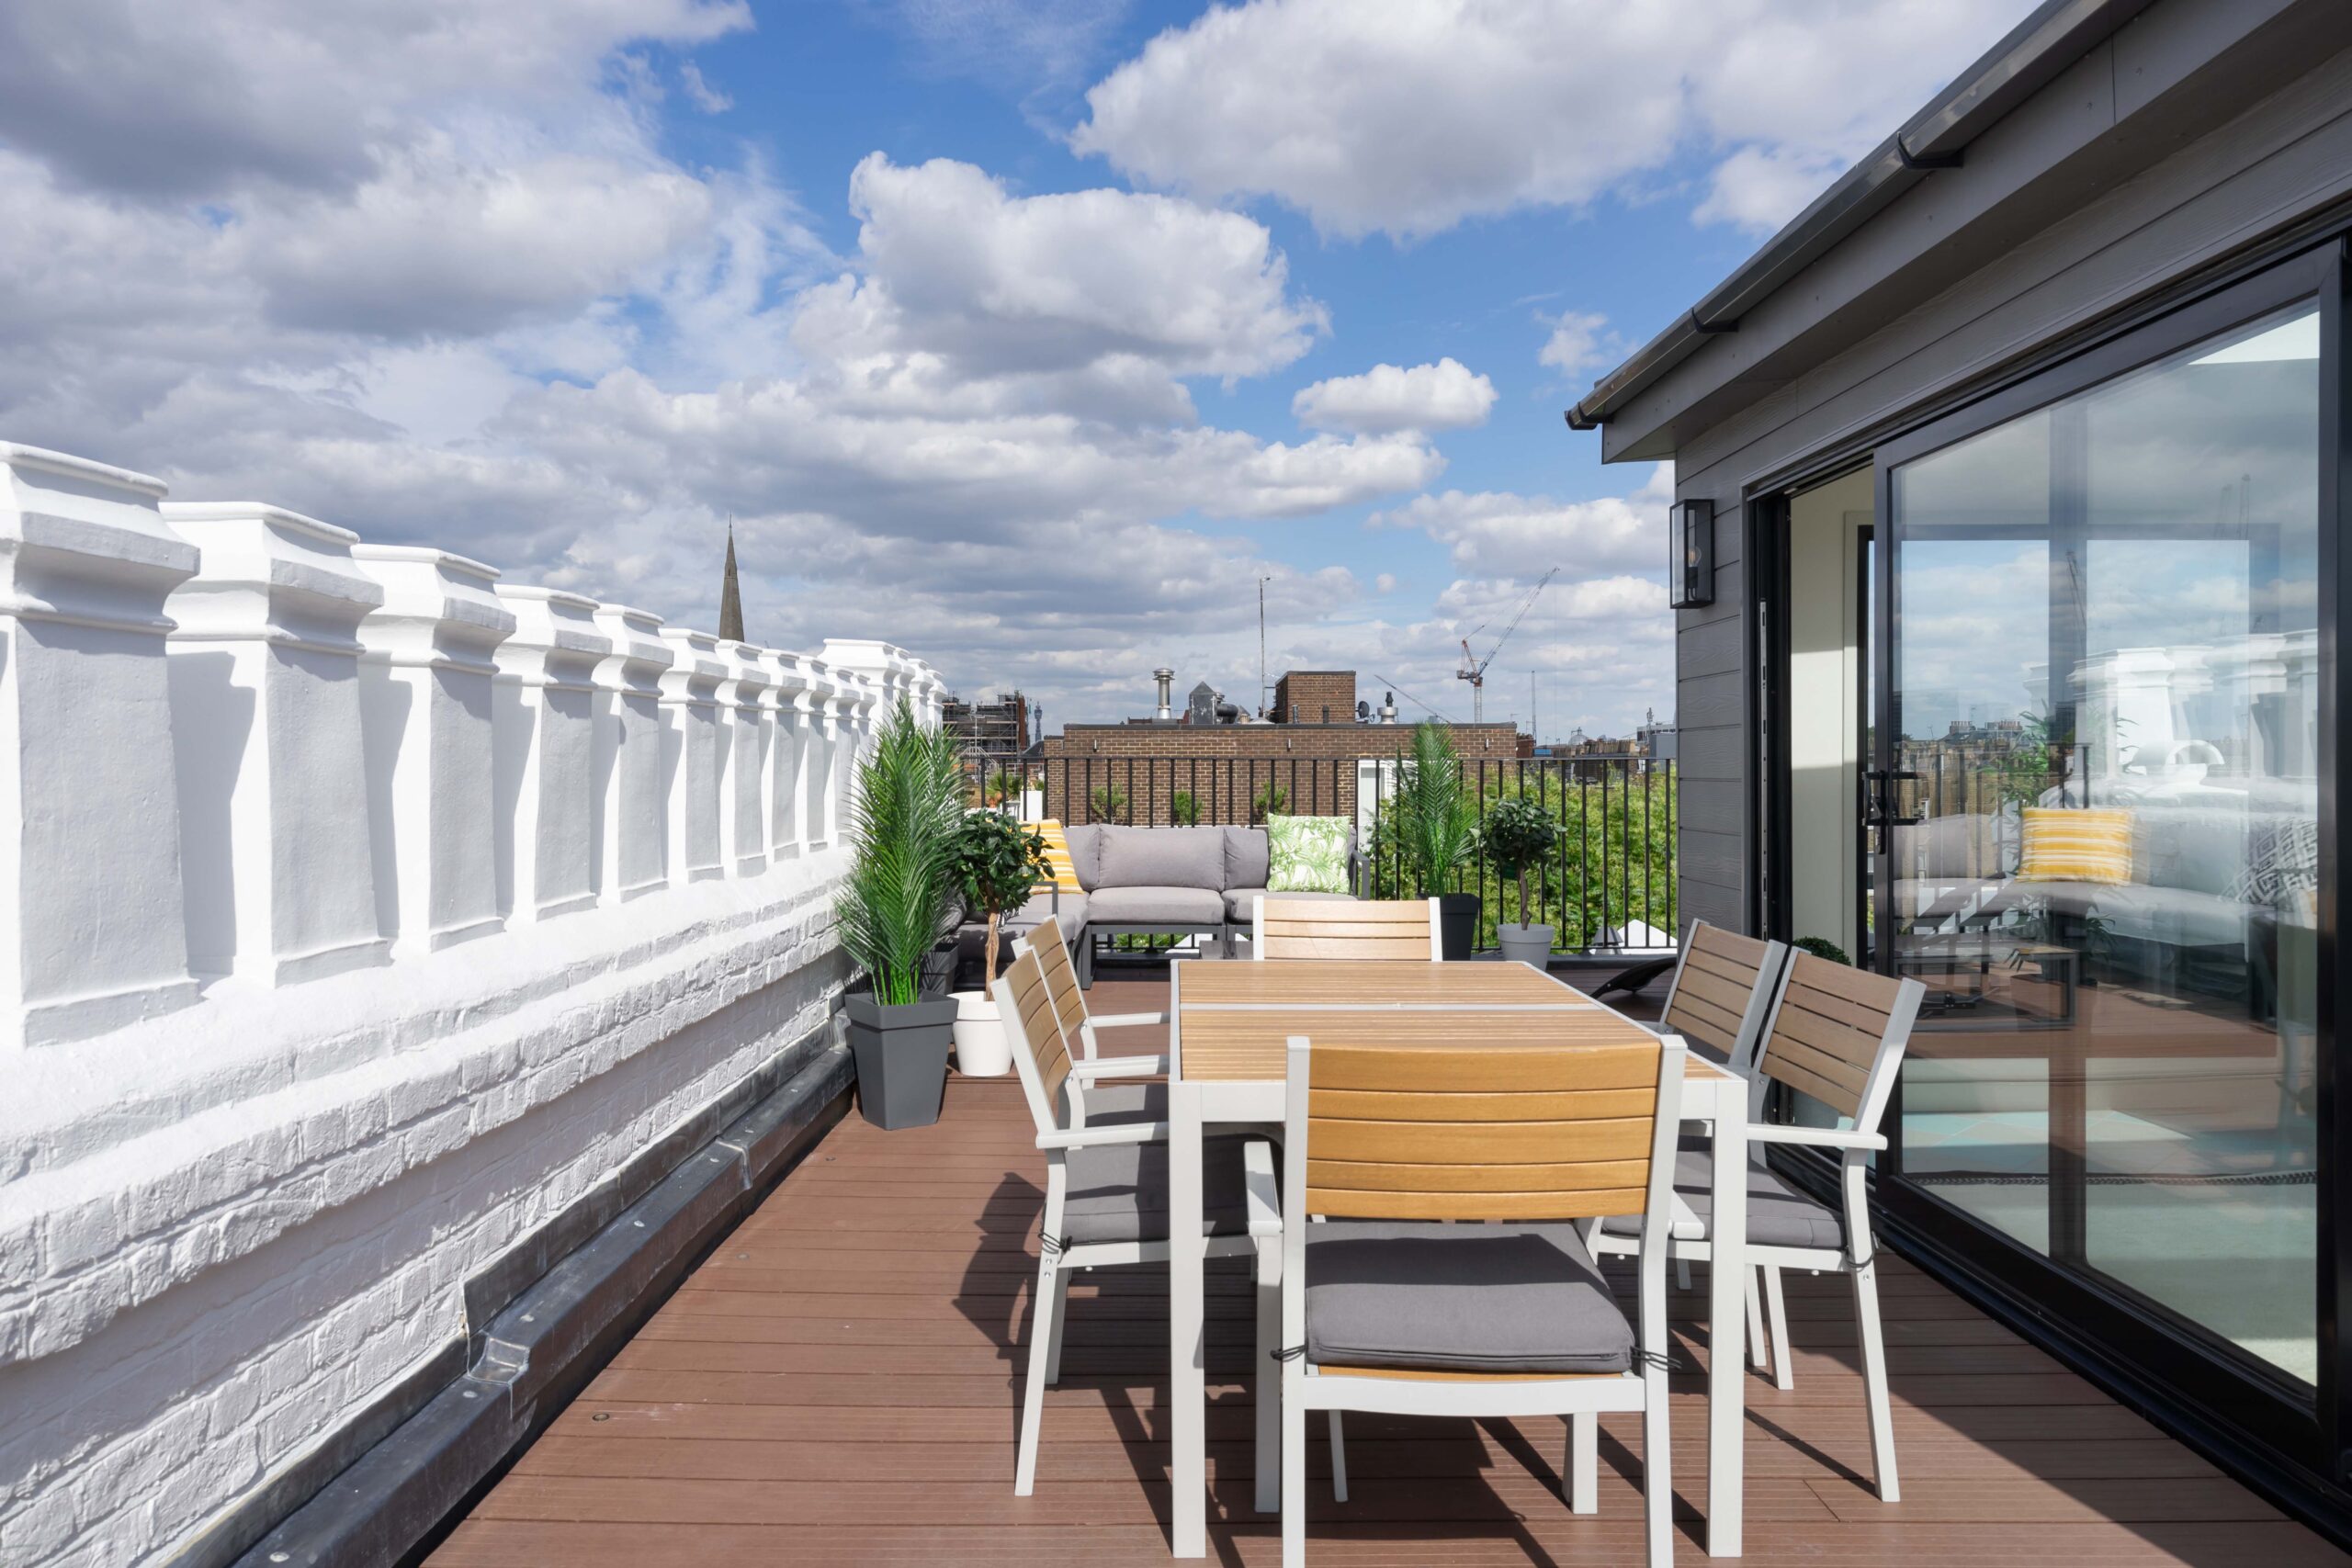 Roof terrace at Linden Gardens Bayswater